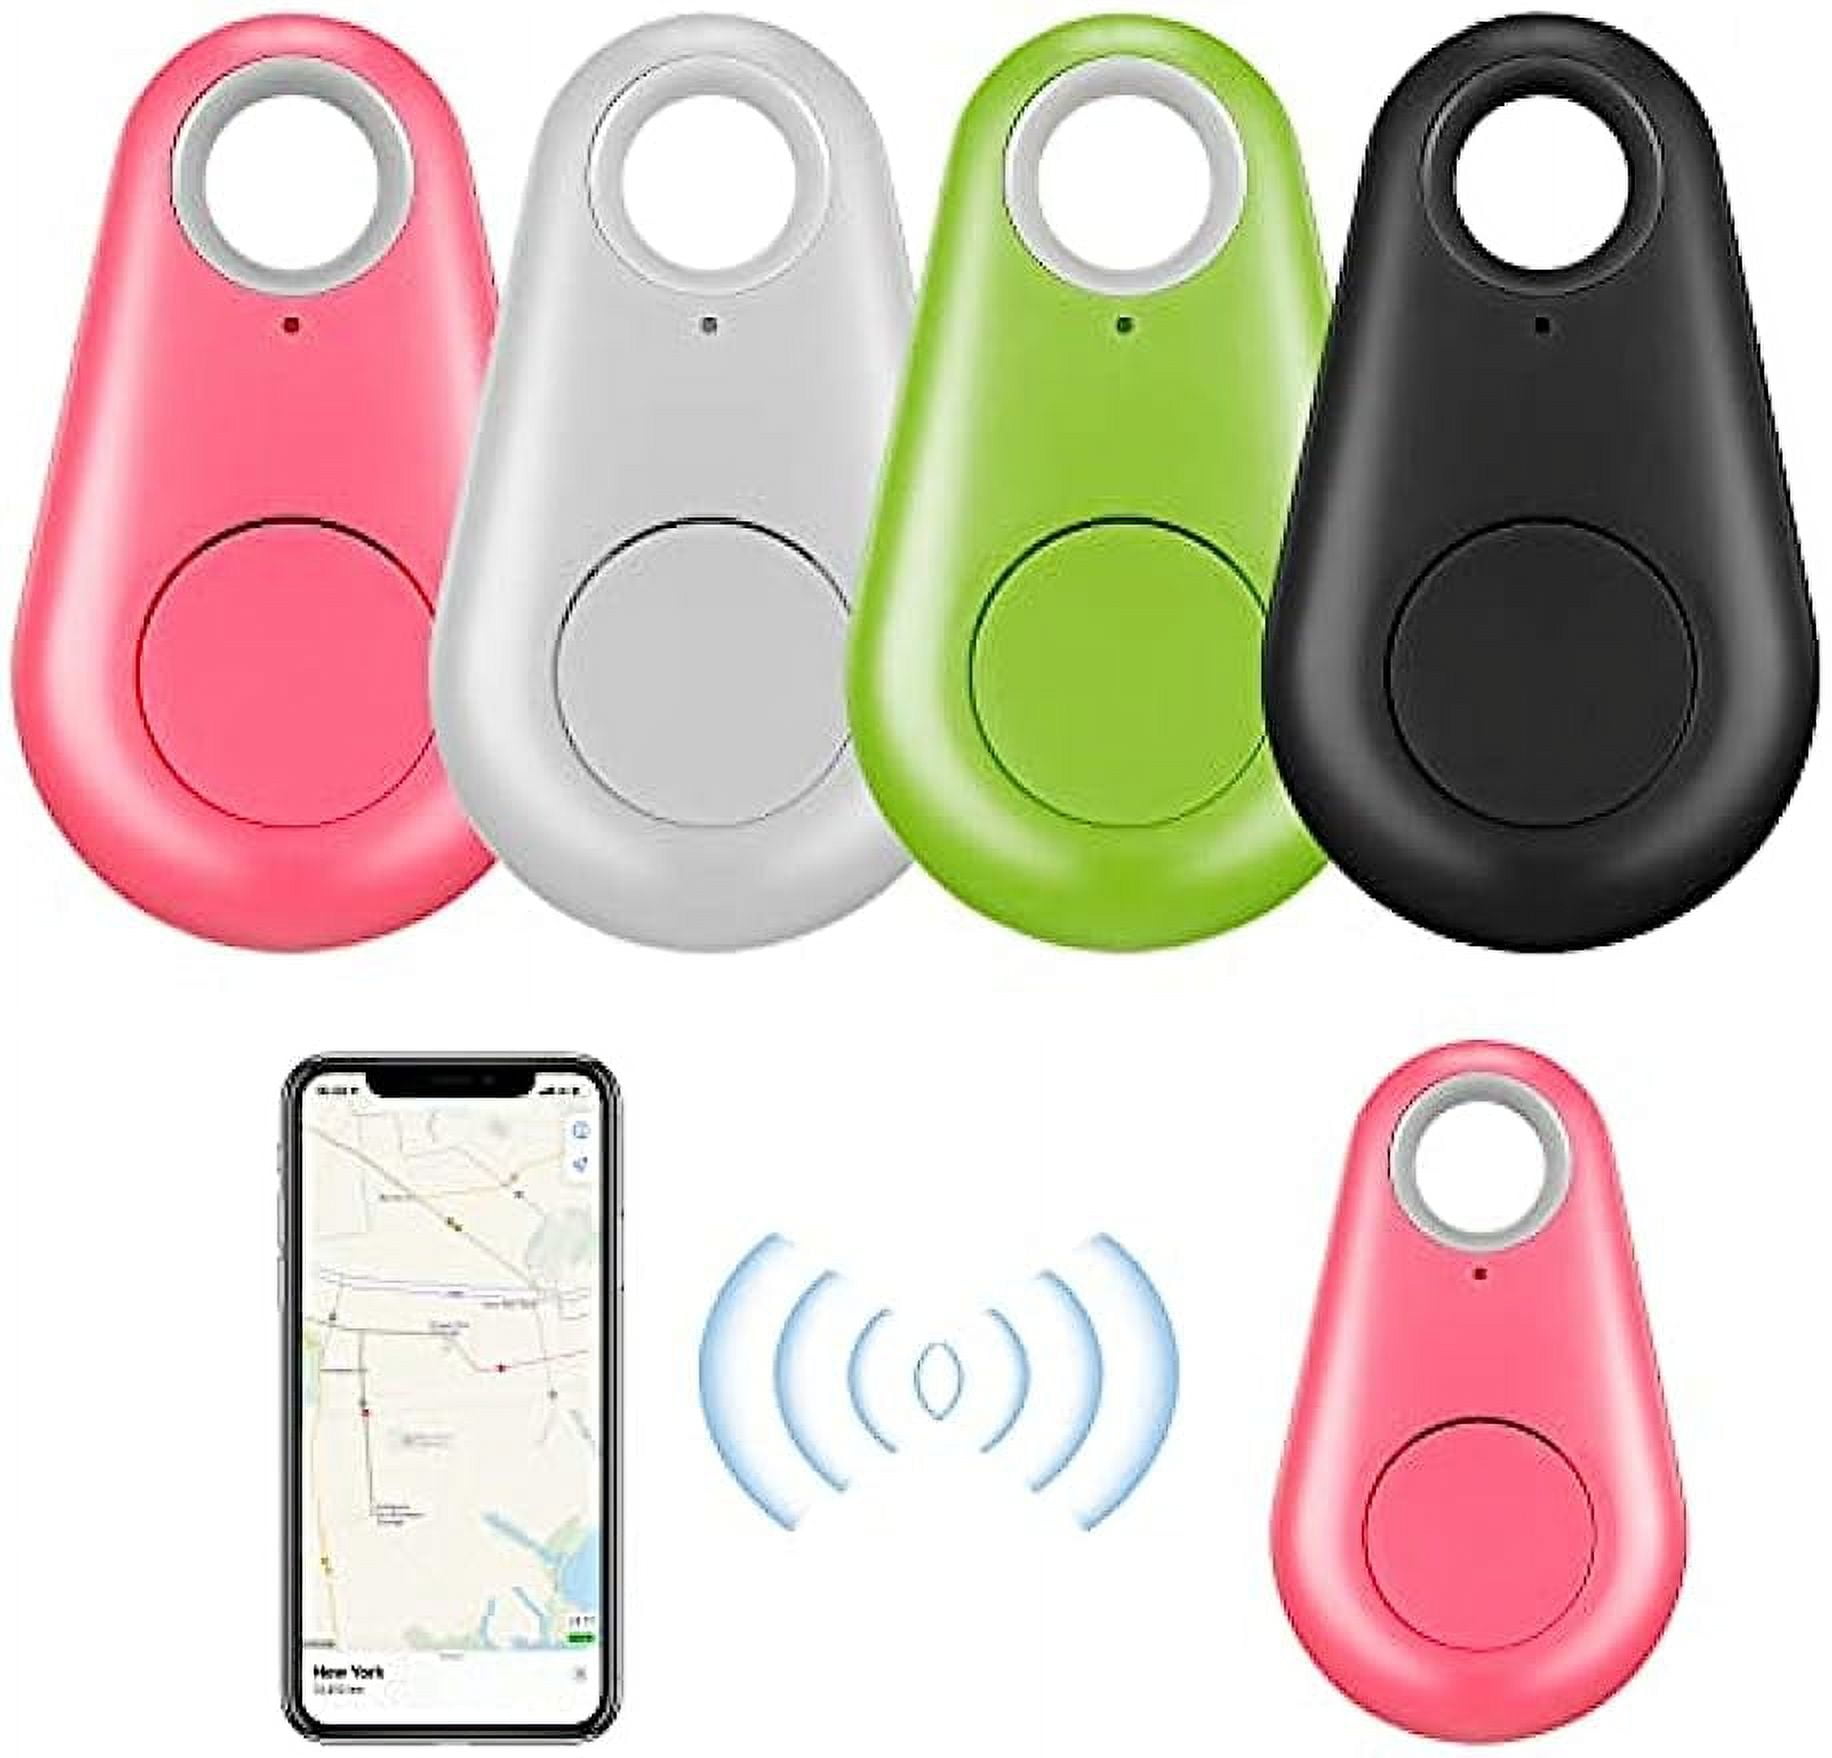 GF-09 Mini Localizador GPS Tracker Locator Smart Key Finder Anti Lost Audio  Recorder Wearable Tracking Devices For Pets Kids